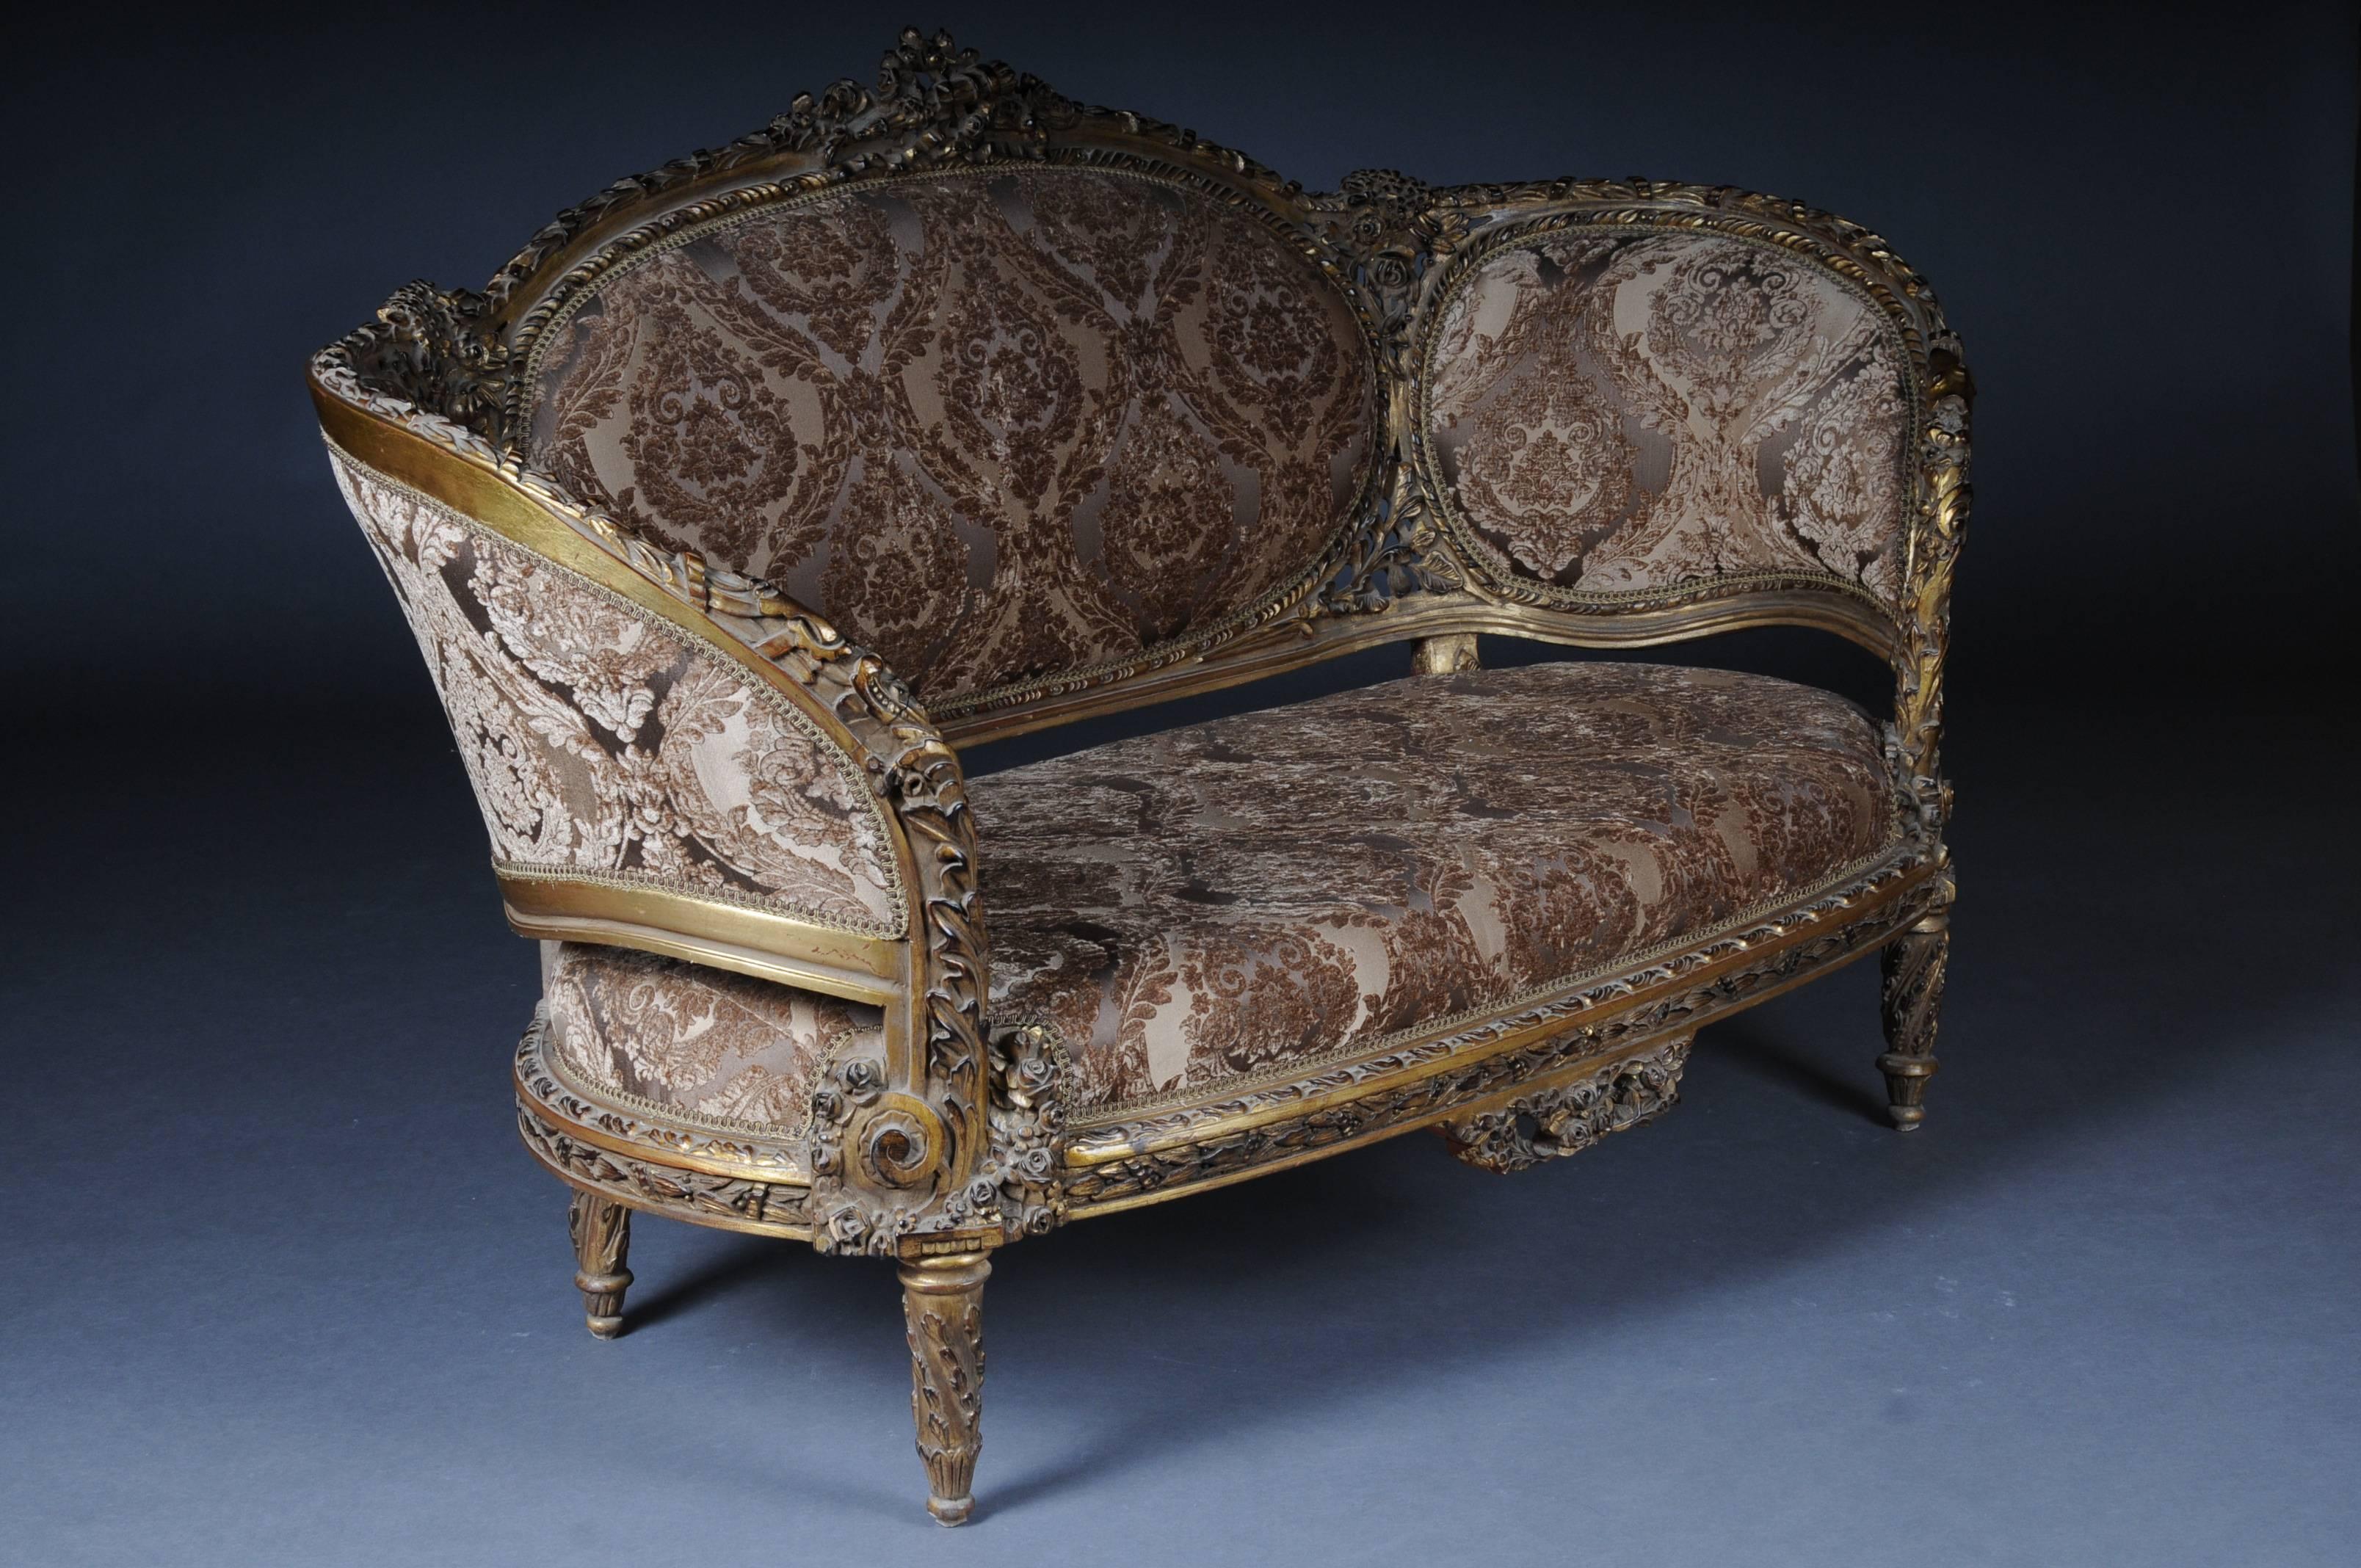 Solid beechwood, carved and painted. Semicircular rising backrest framing with openwork rocaille crowning. Appropriately curved frame with rich relief carved foliage. Slightly curved frame on curly legs. Seat and backrest are finished with a